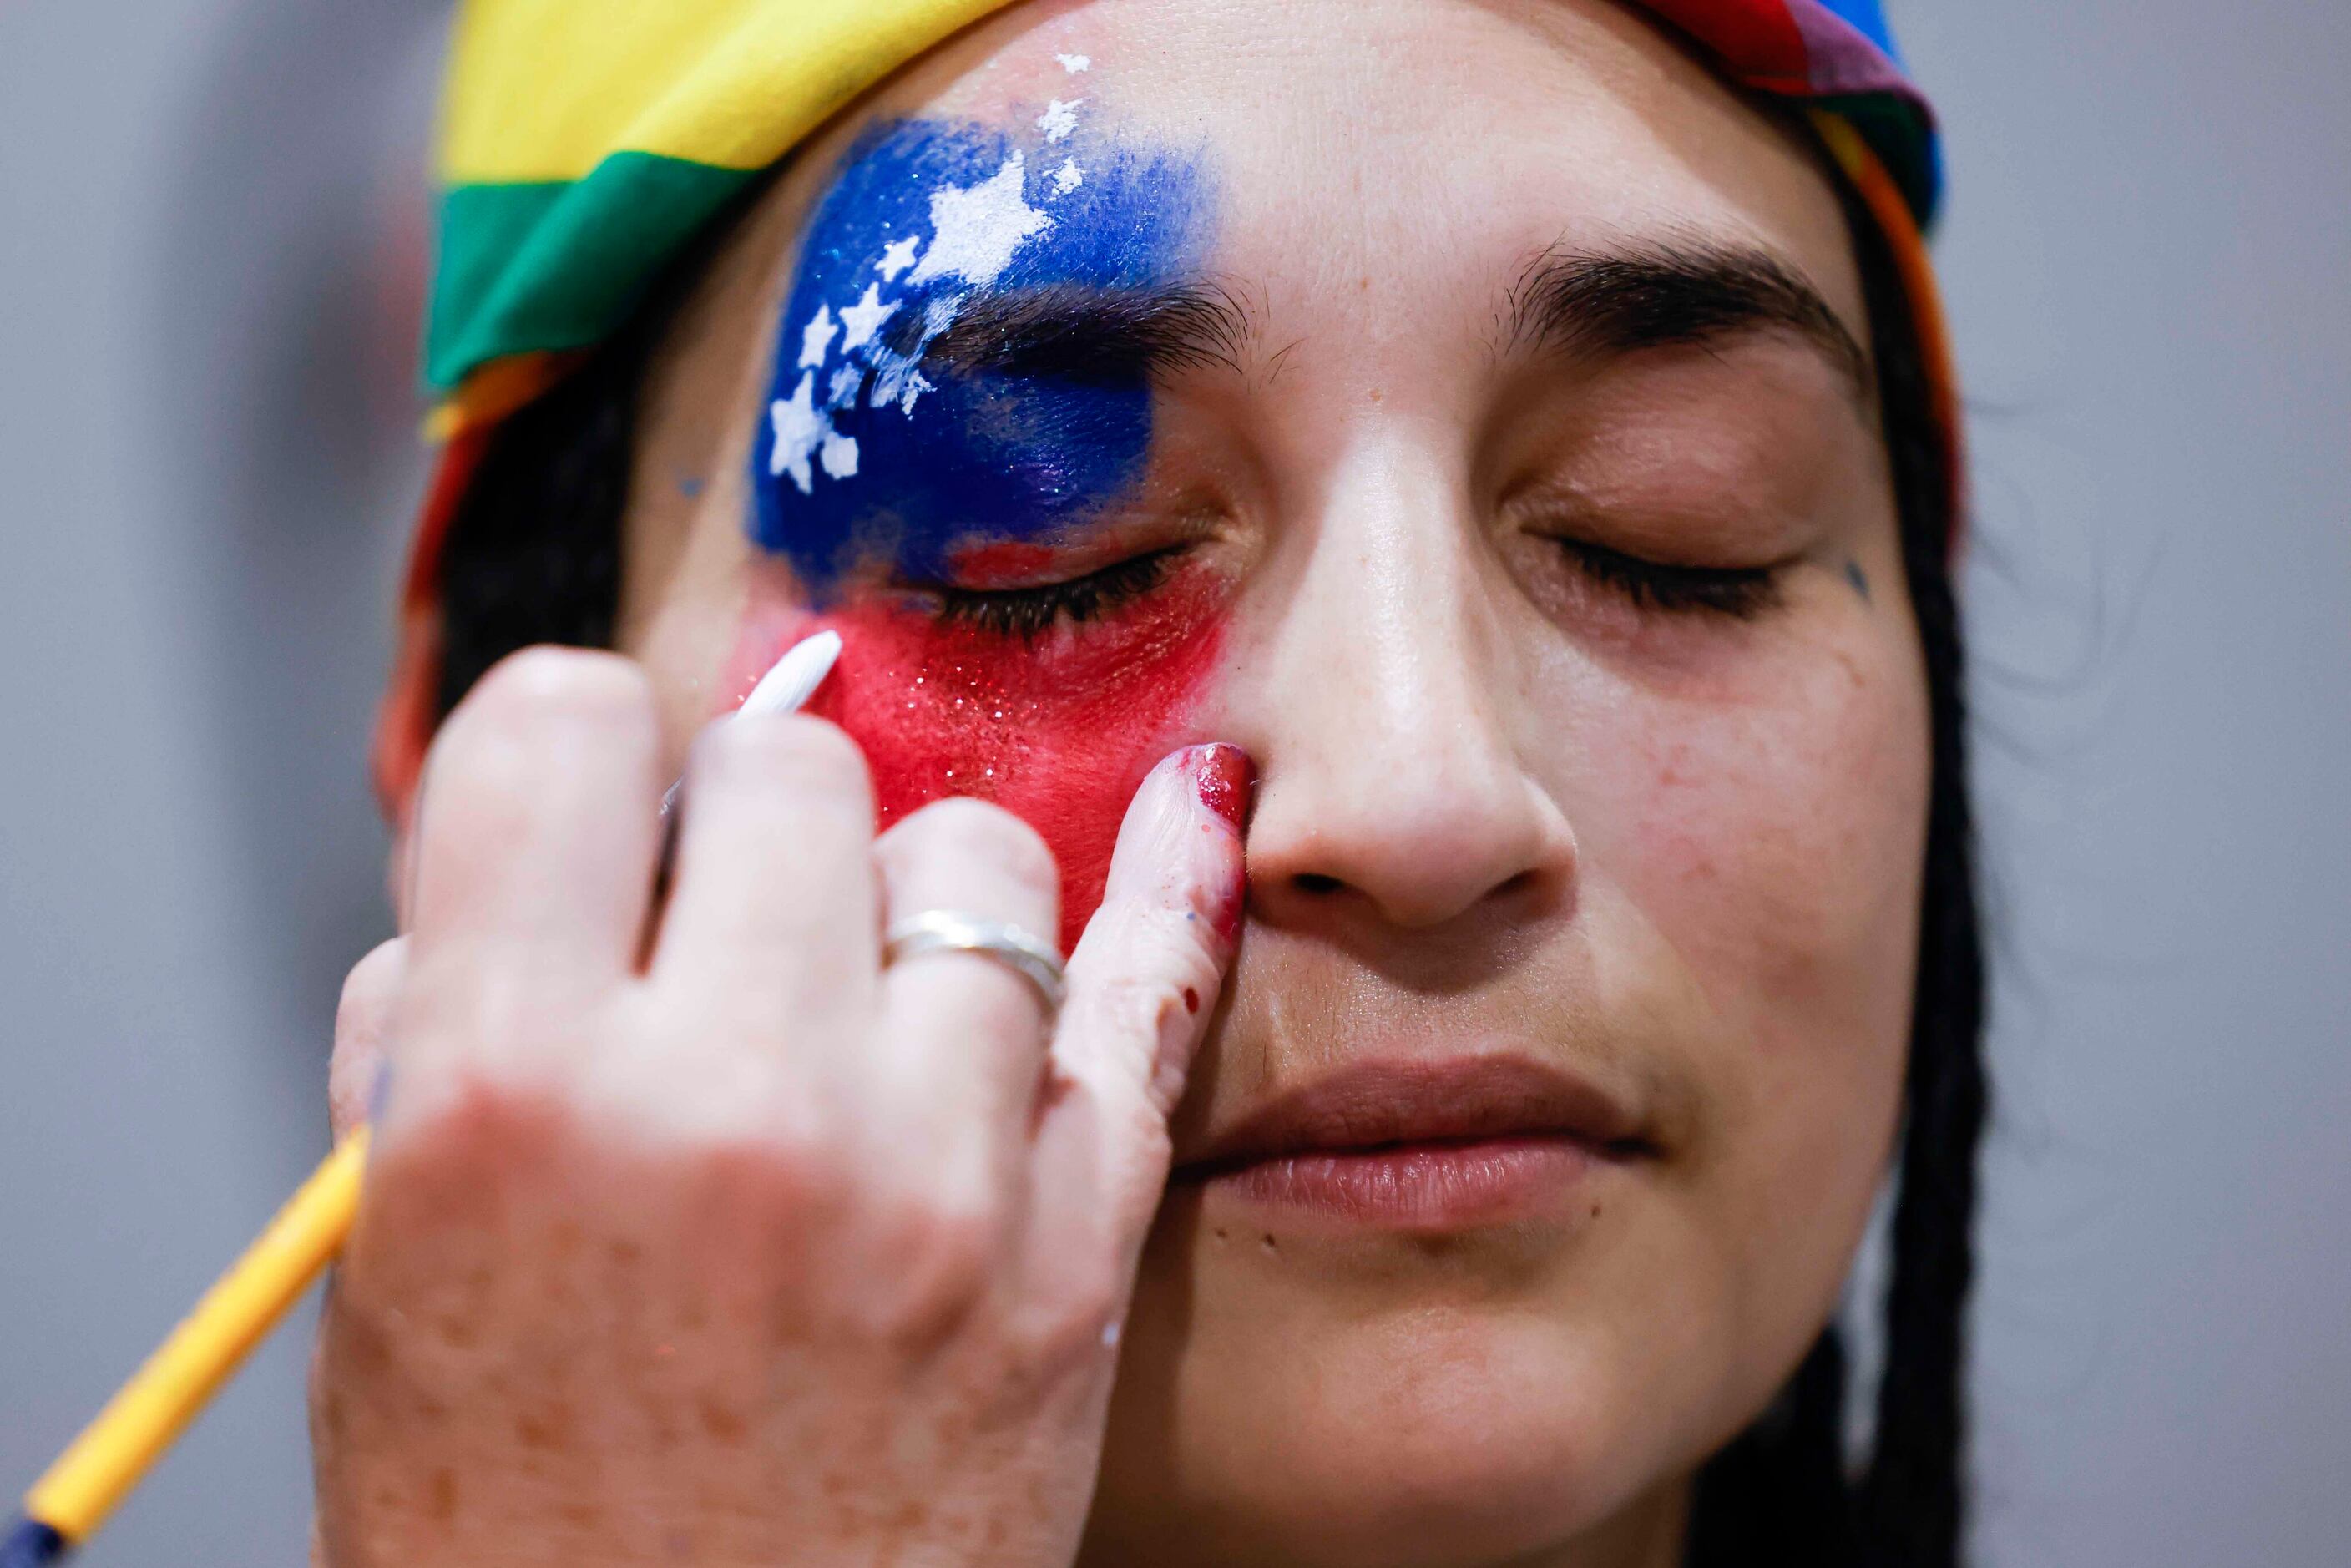 Max Longoria gets a face paint of U.S National flag during an Independence Day celebration...